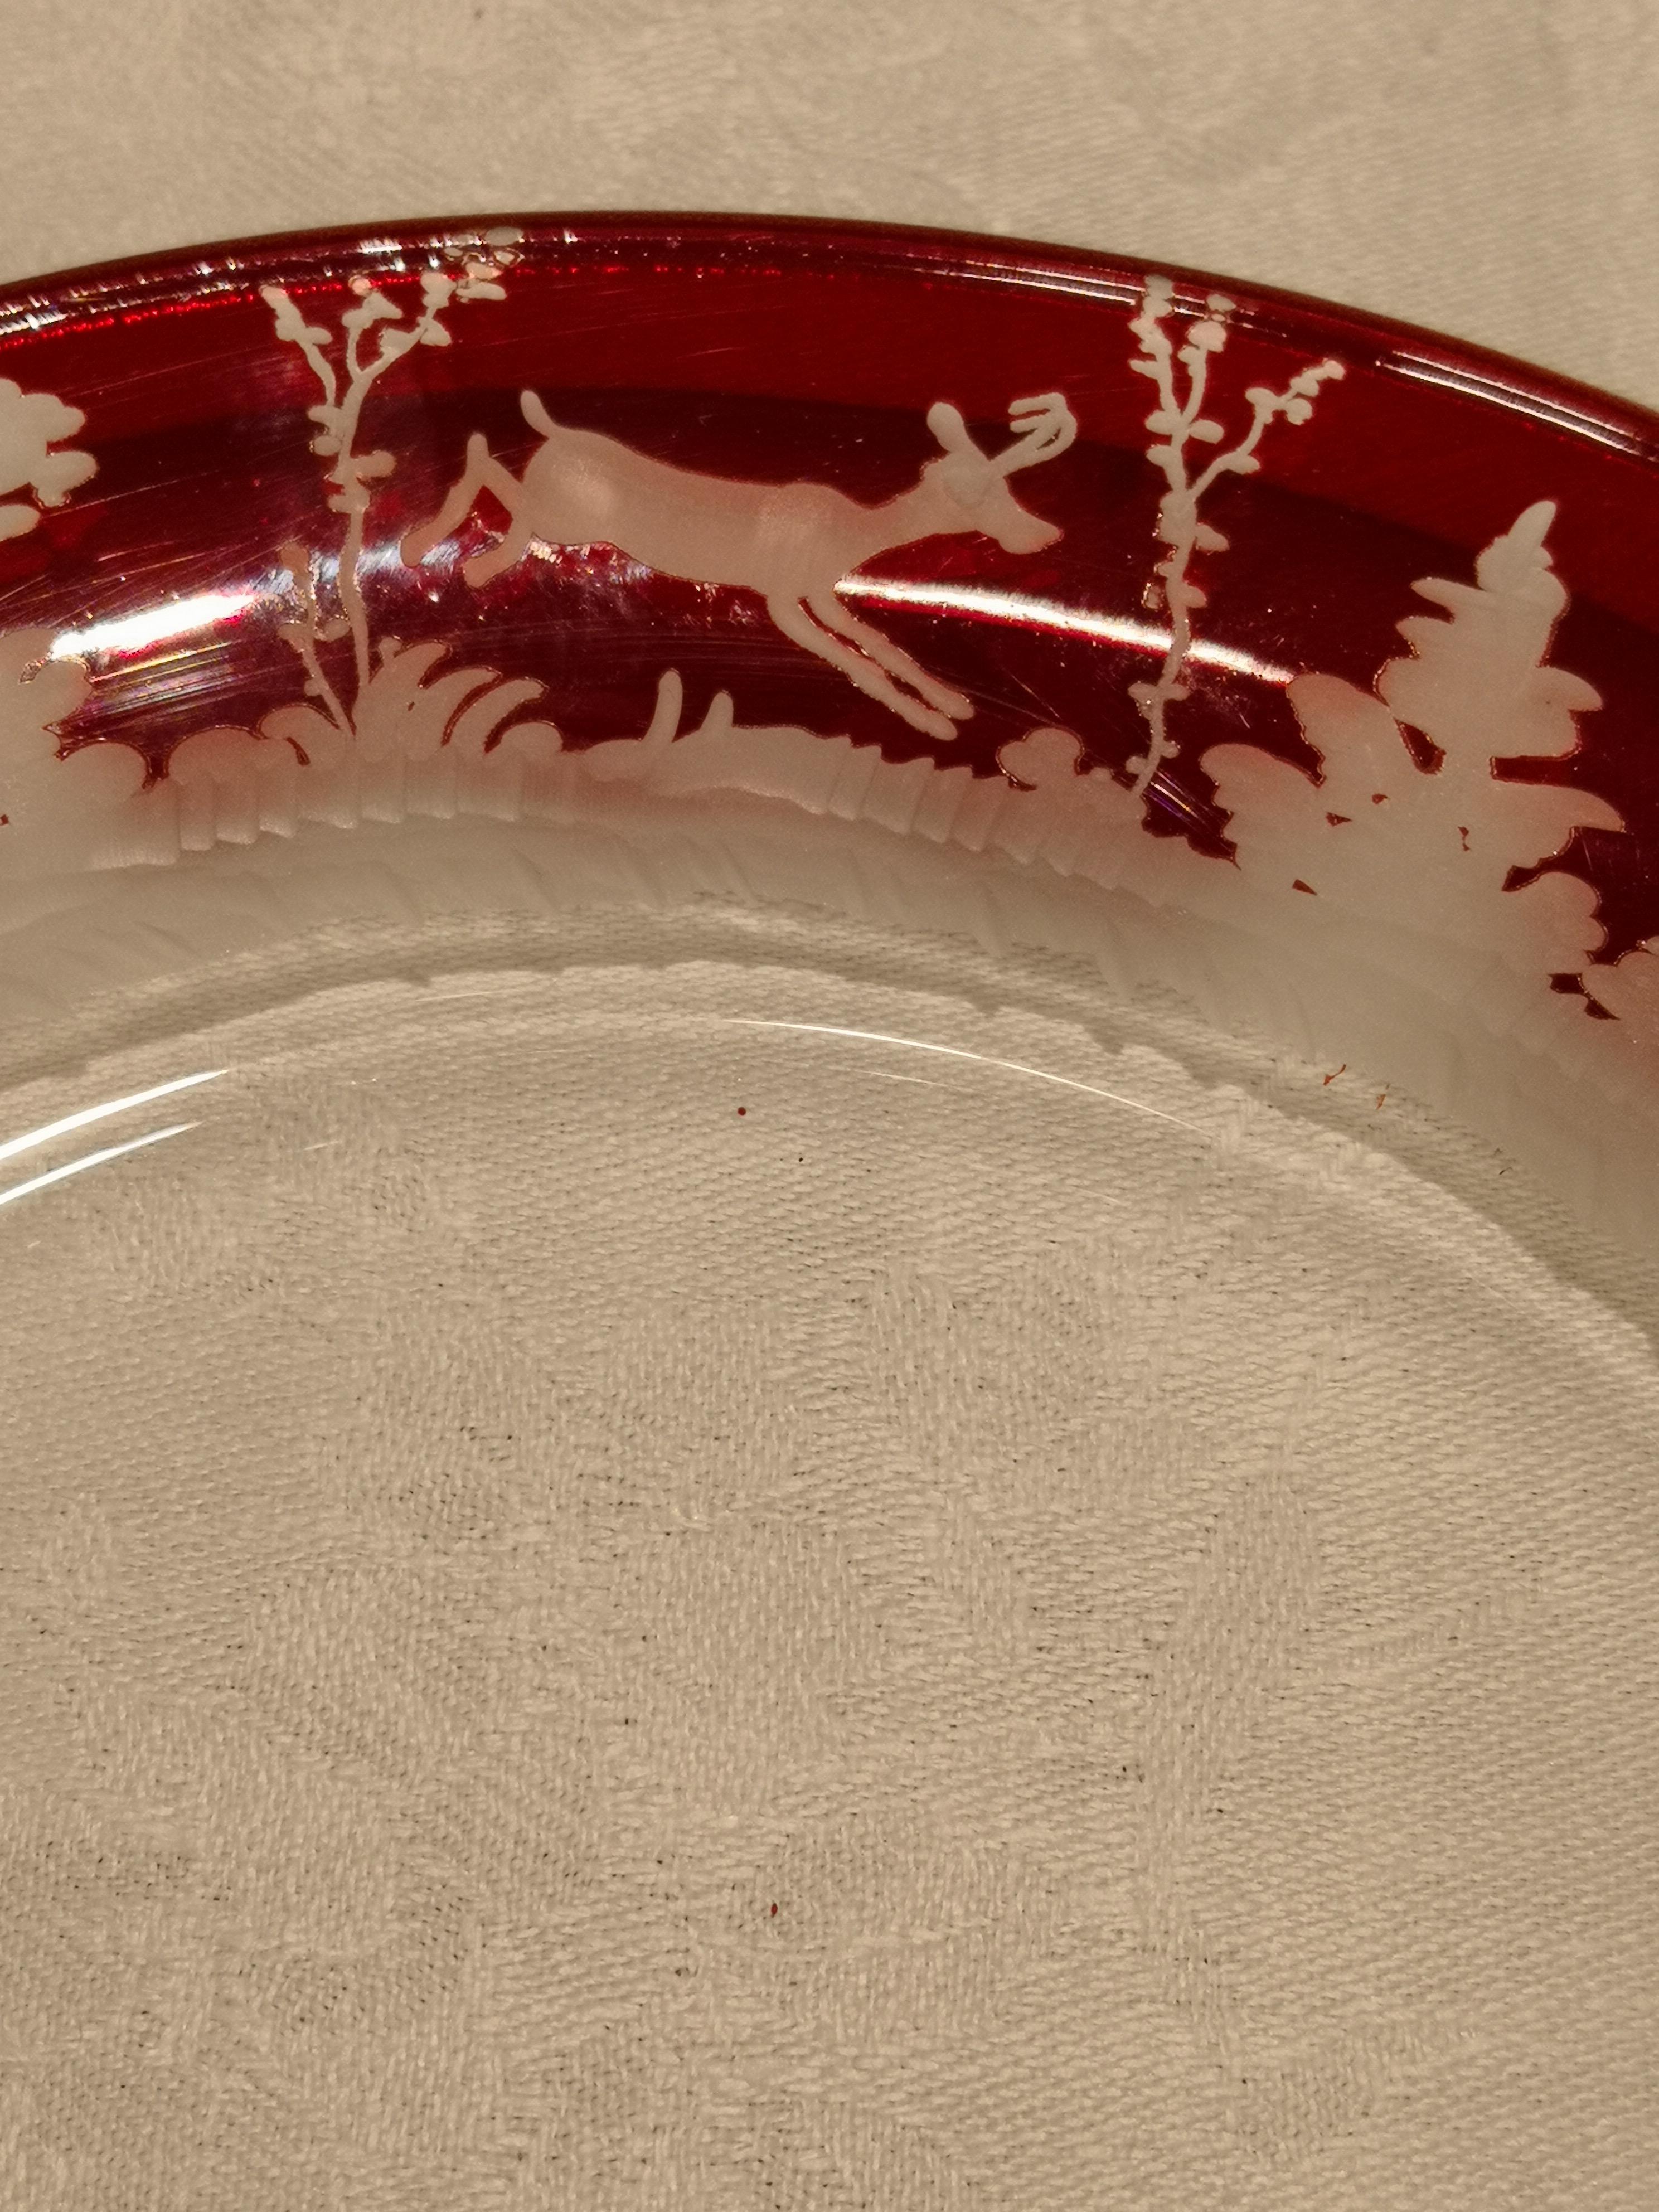 Set of six plates in red crystal with an hands-free engraved antique black forest hunting decor all around. The charming hand-engraved decor shows a hunting decor with deers, rabbit and trees in the style of Black Forest. The glass plates can be